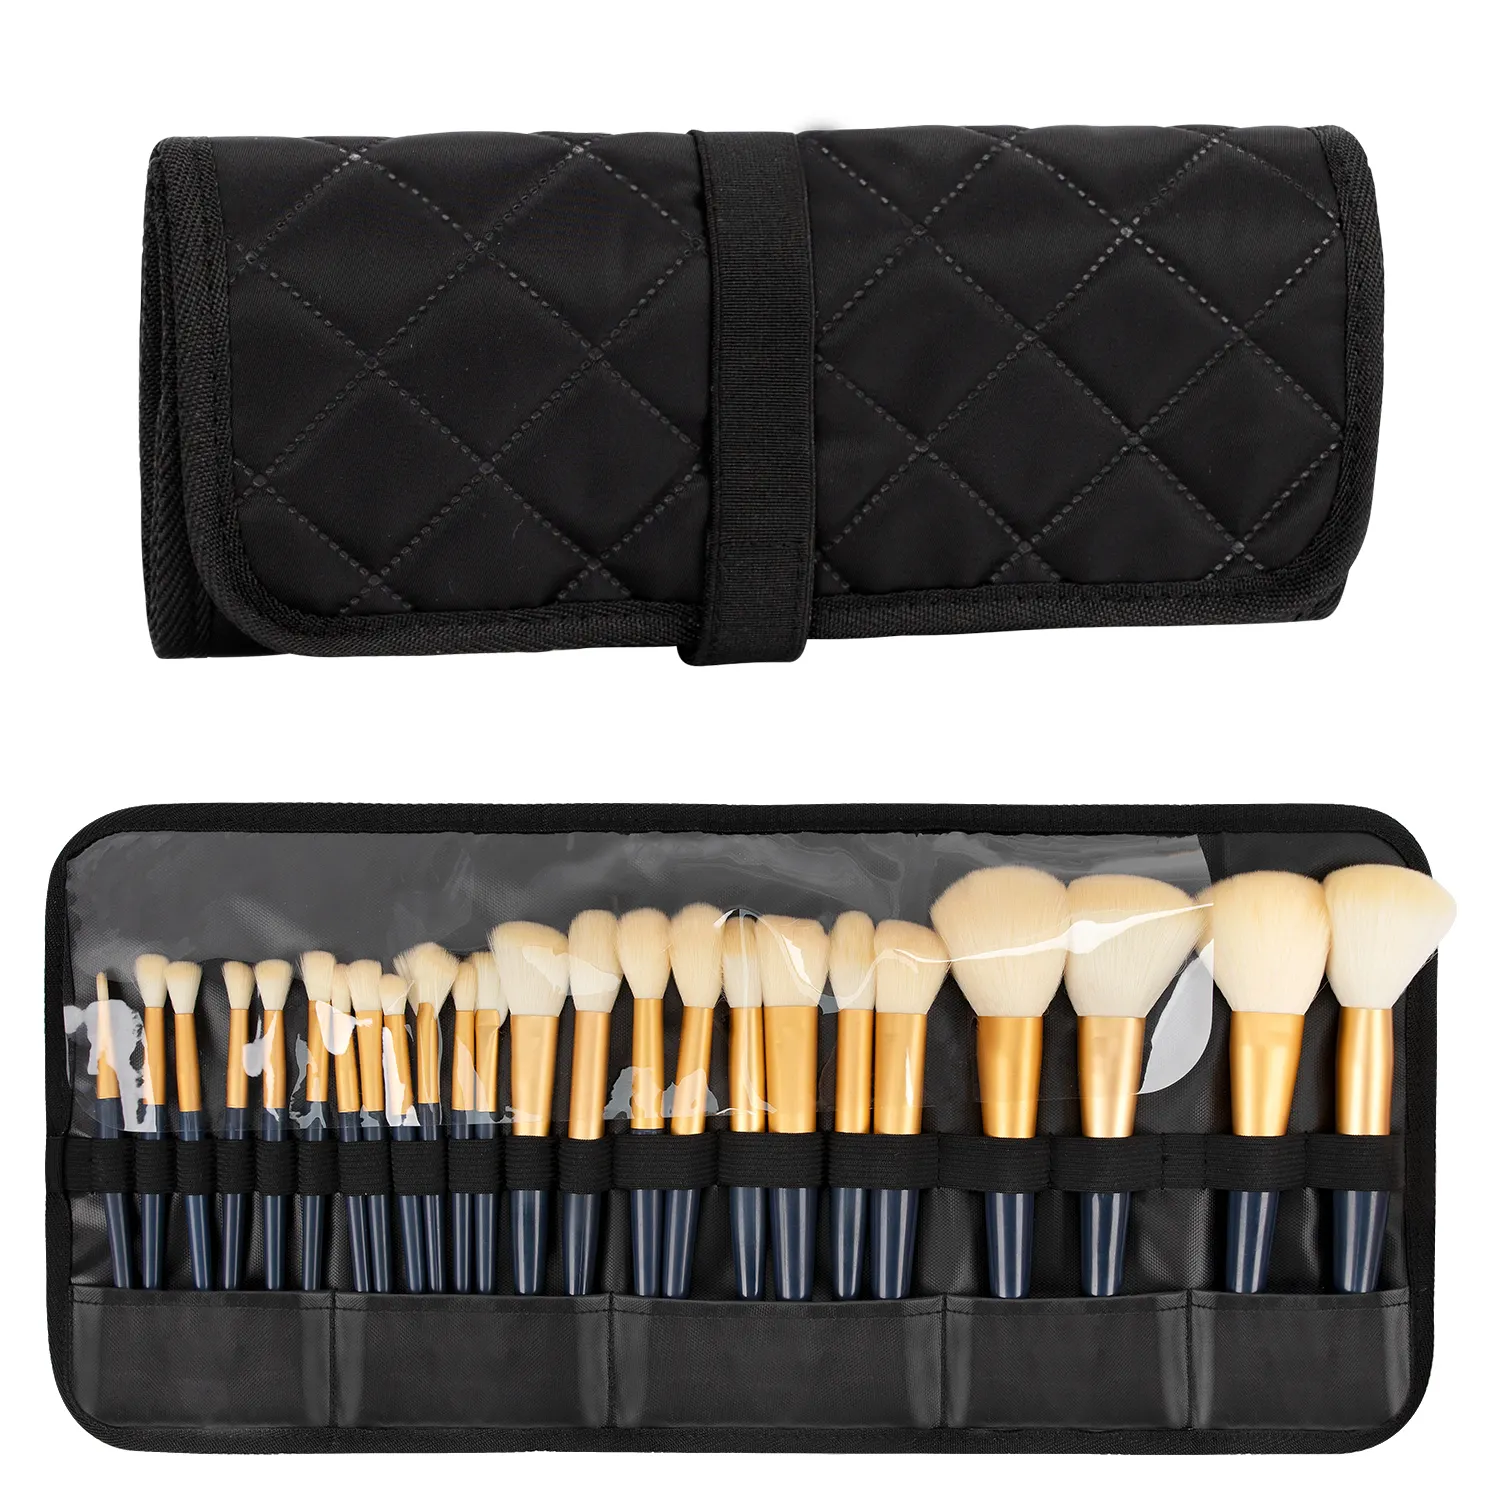 Relavel Hot Selling Professional Roll up Black Waterproof Makeup Cosmetic Brush Pouch Bag